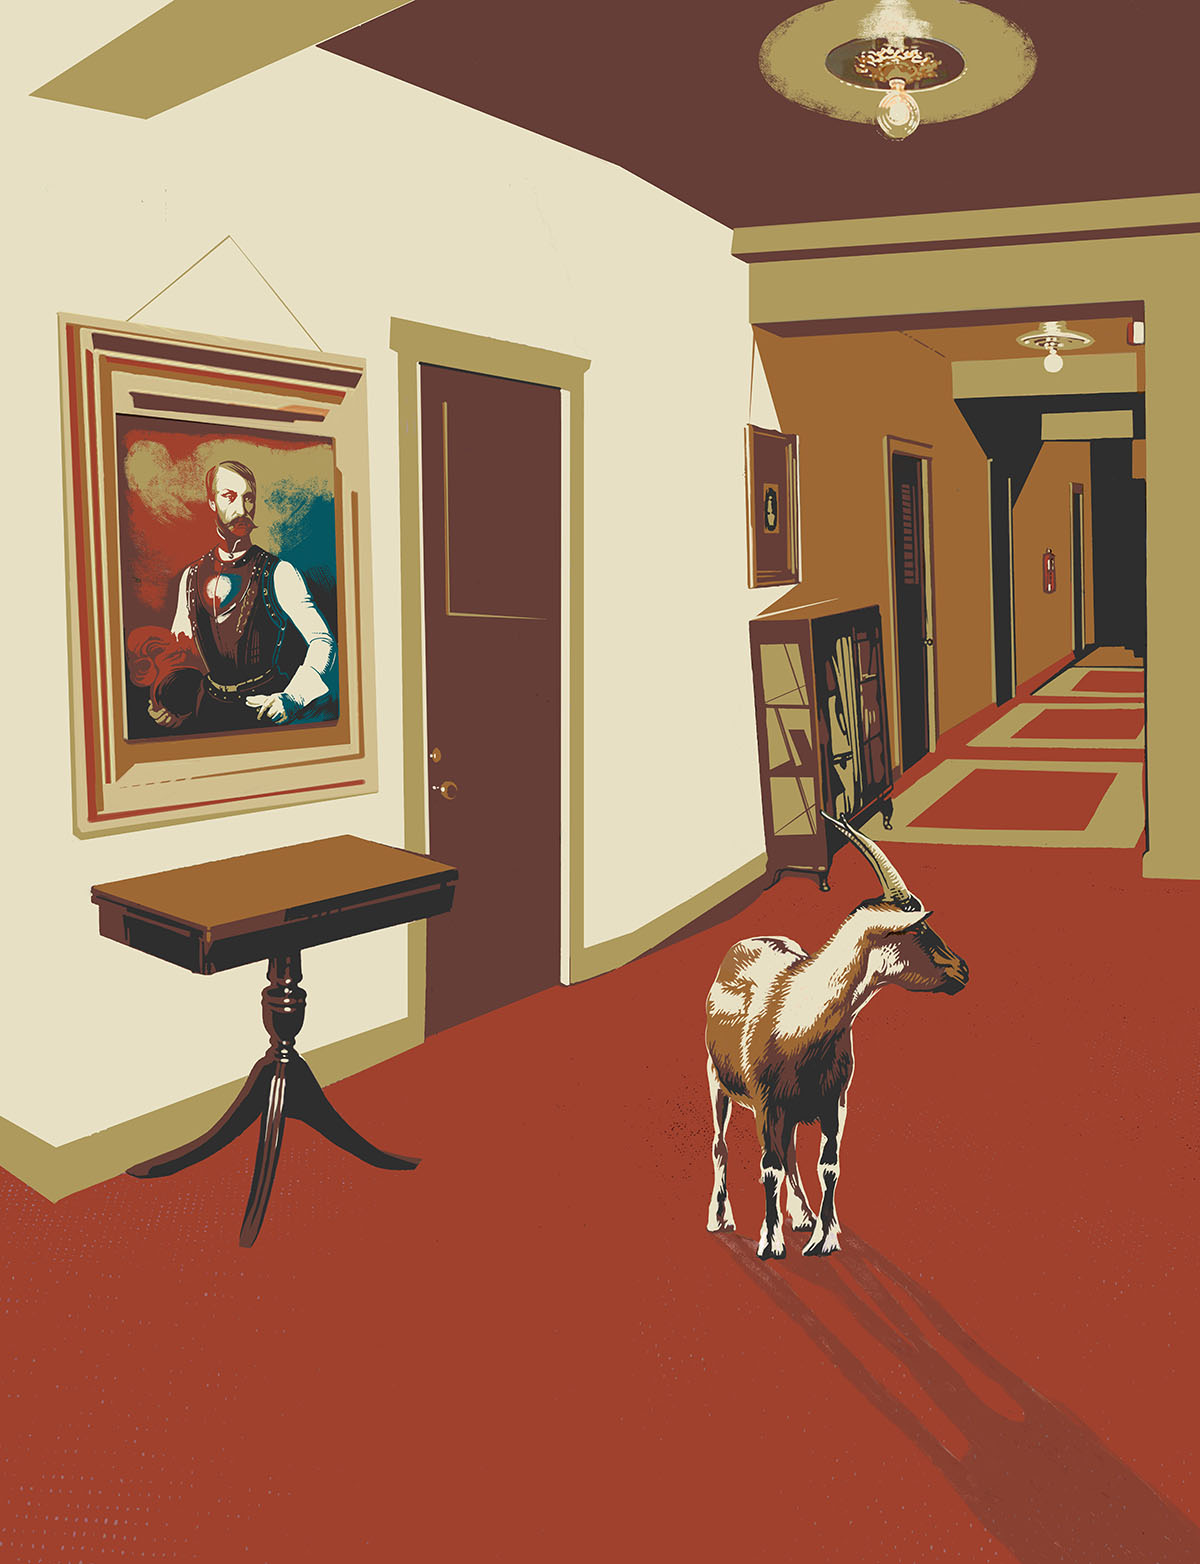 An illustration of a goat standing in a hallway with a rich red rug and portrait on the wall and ornate light fixture